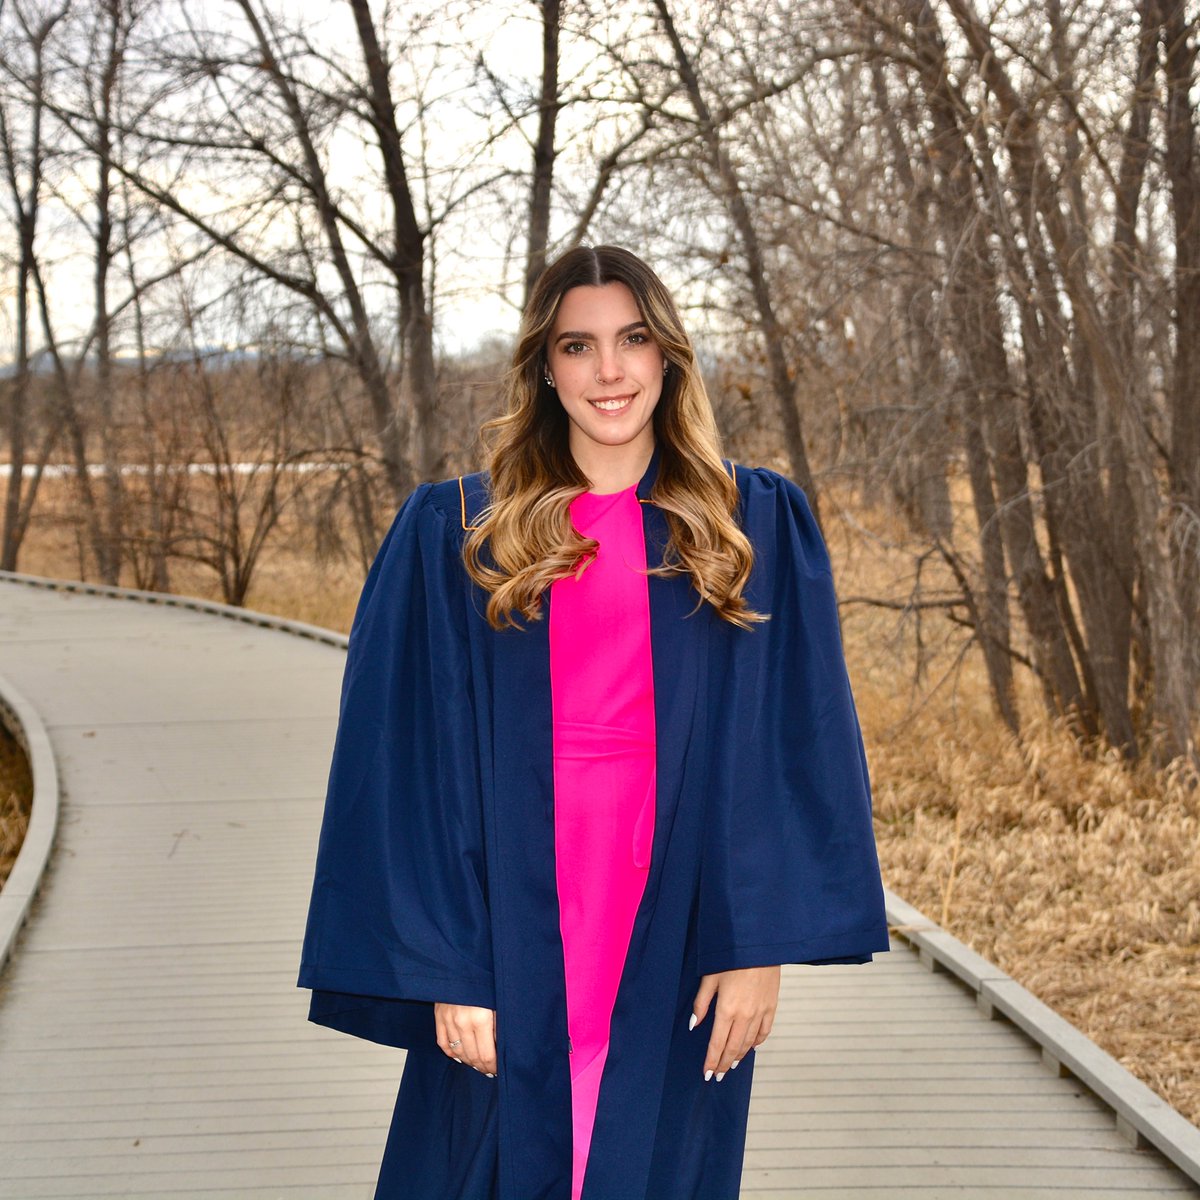 Class of 2024 Graduate, Leah Charette believes taking charge of your own education is important for current and future bears. UNC's Center for Urban Education helped Leah pursue a degree while working in the field. More: unco.edu/news/articles/…. #UNCBears #Celebrate #GradStories